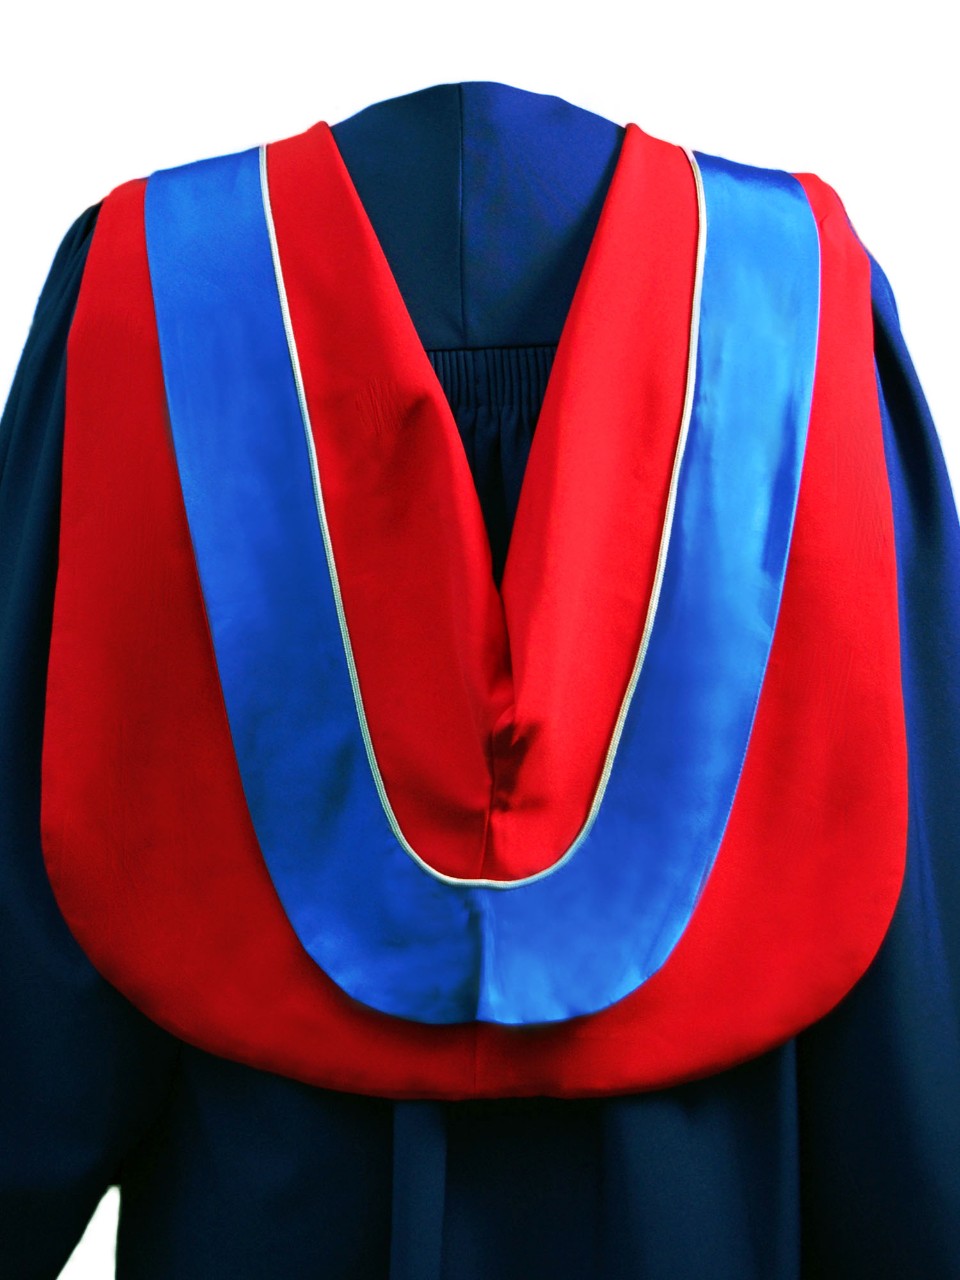 The Master of Business Administration hood is red with wide blue border and grey cording.